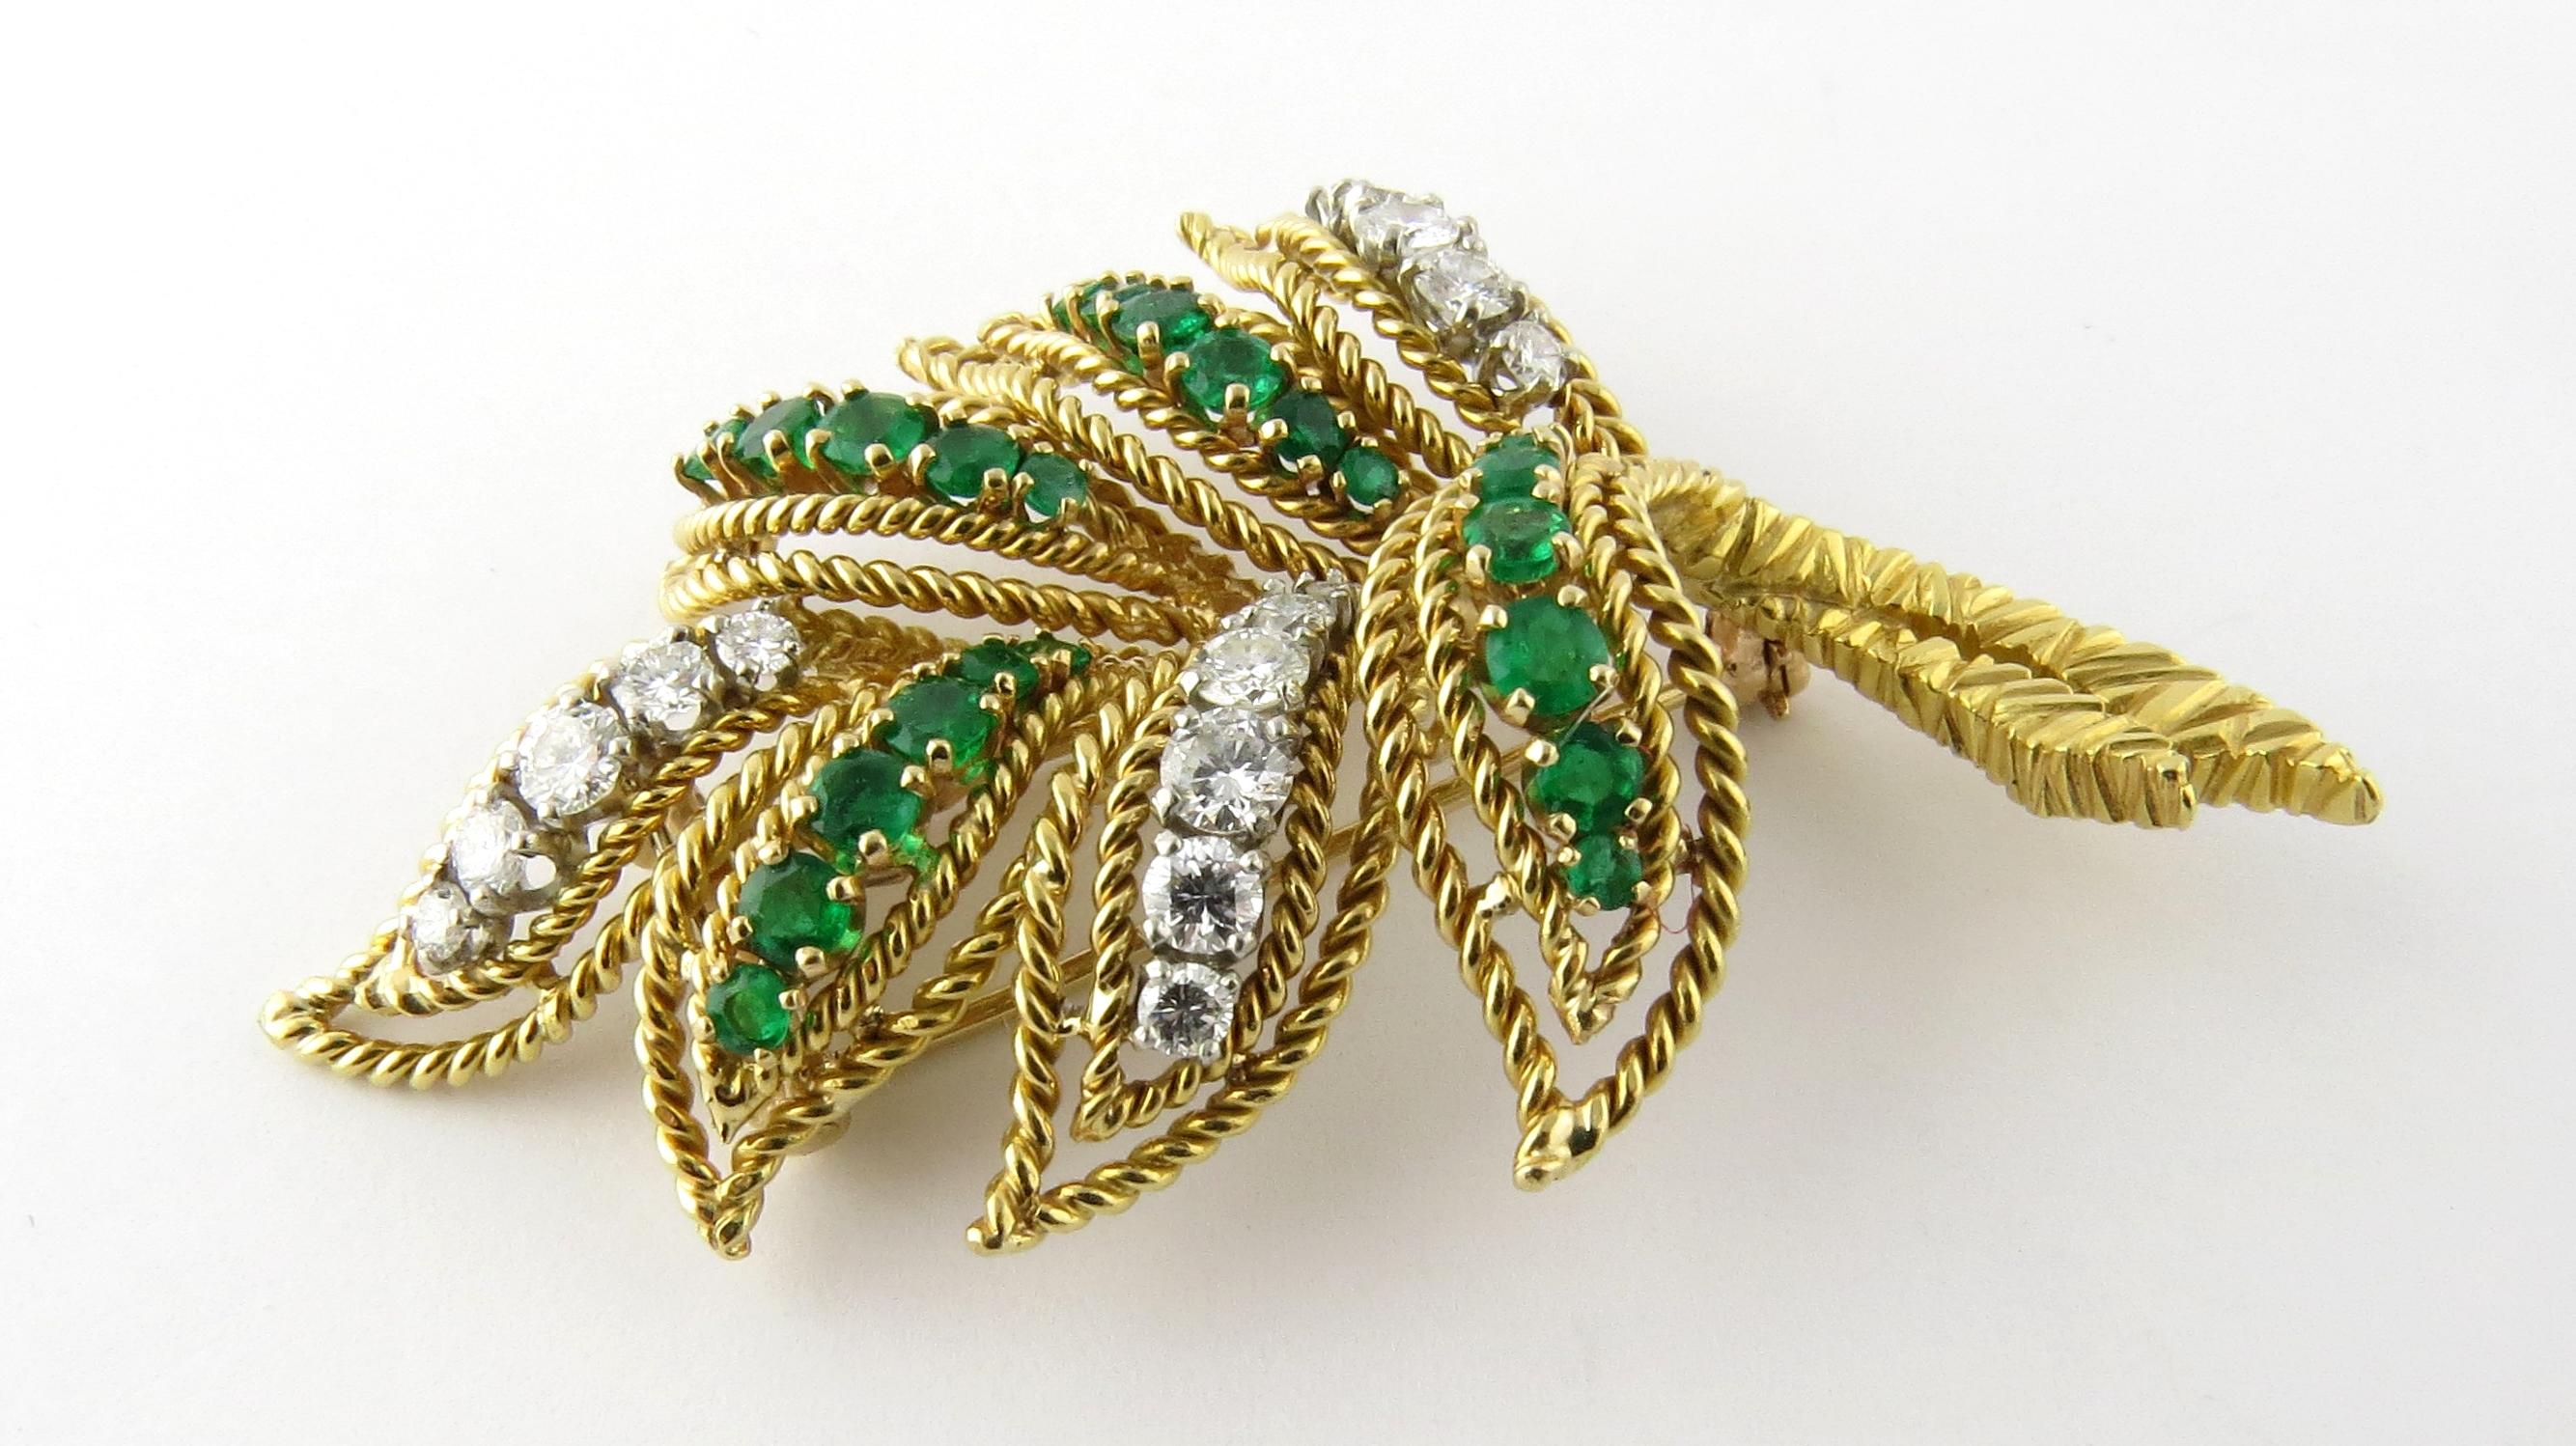 Van Cleef & Arpels 18K Yellow Gold Diamond Emerald Leaf Brooch Pin 

This gorgeous vintage brooch dates back to the 1960's.

It is created with braided leaves of gold set with genuine green emeralds and diamonds.

16 round brilliant diamonds graded